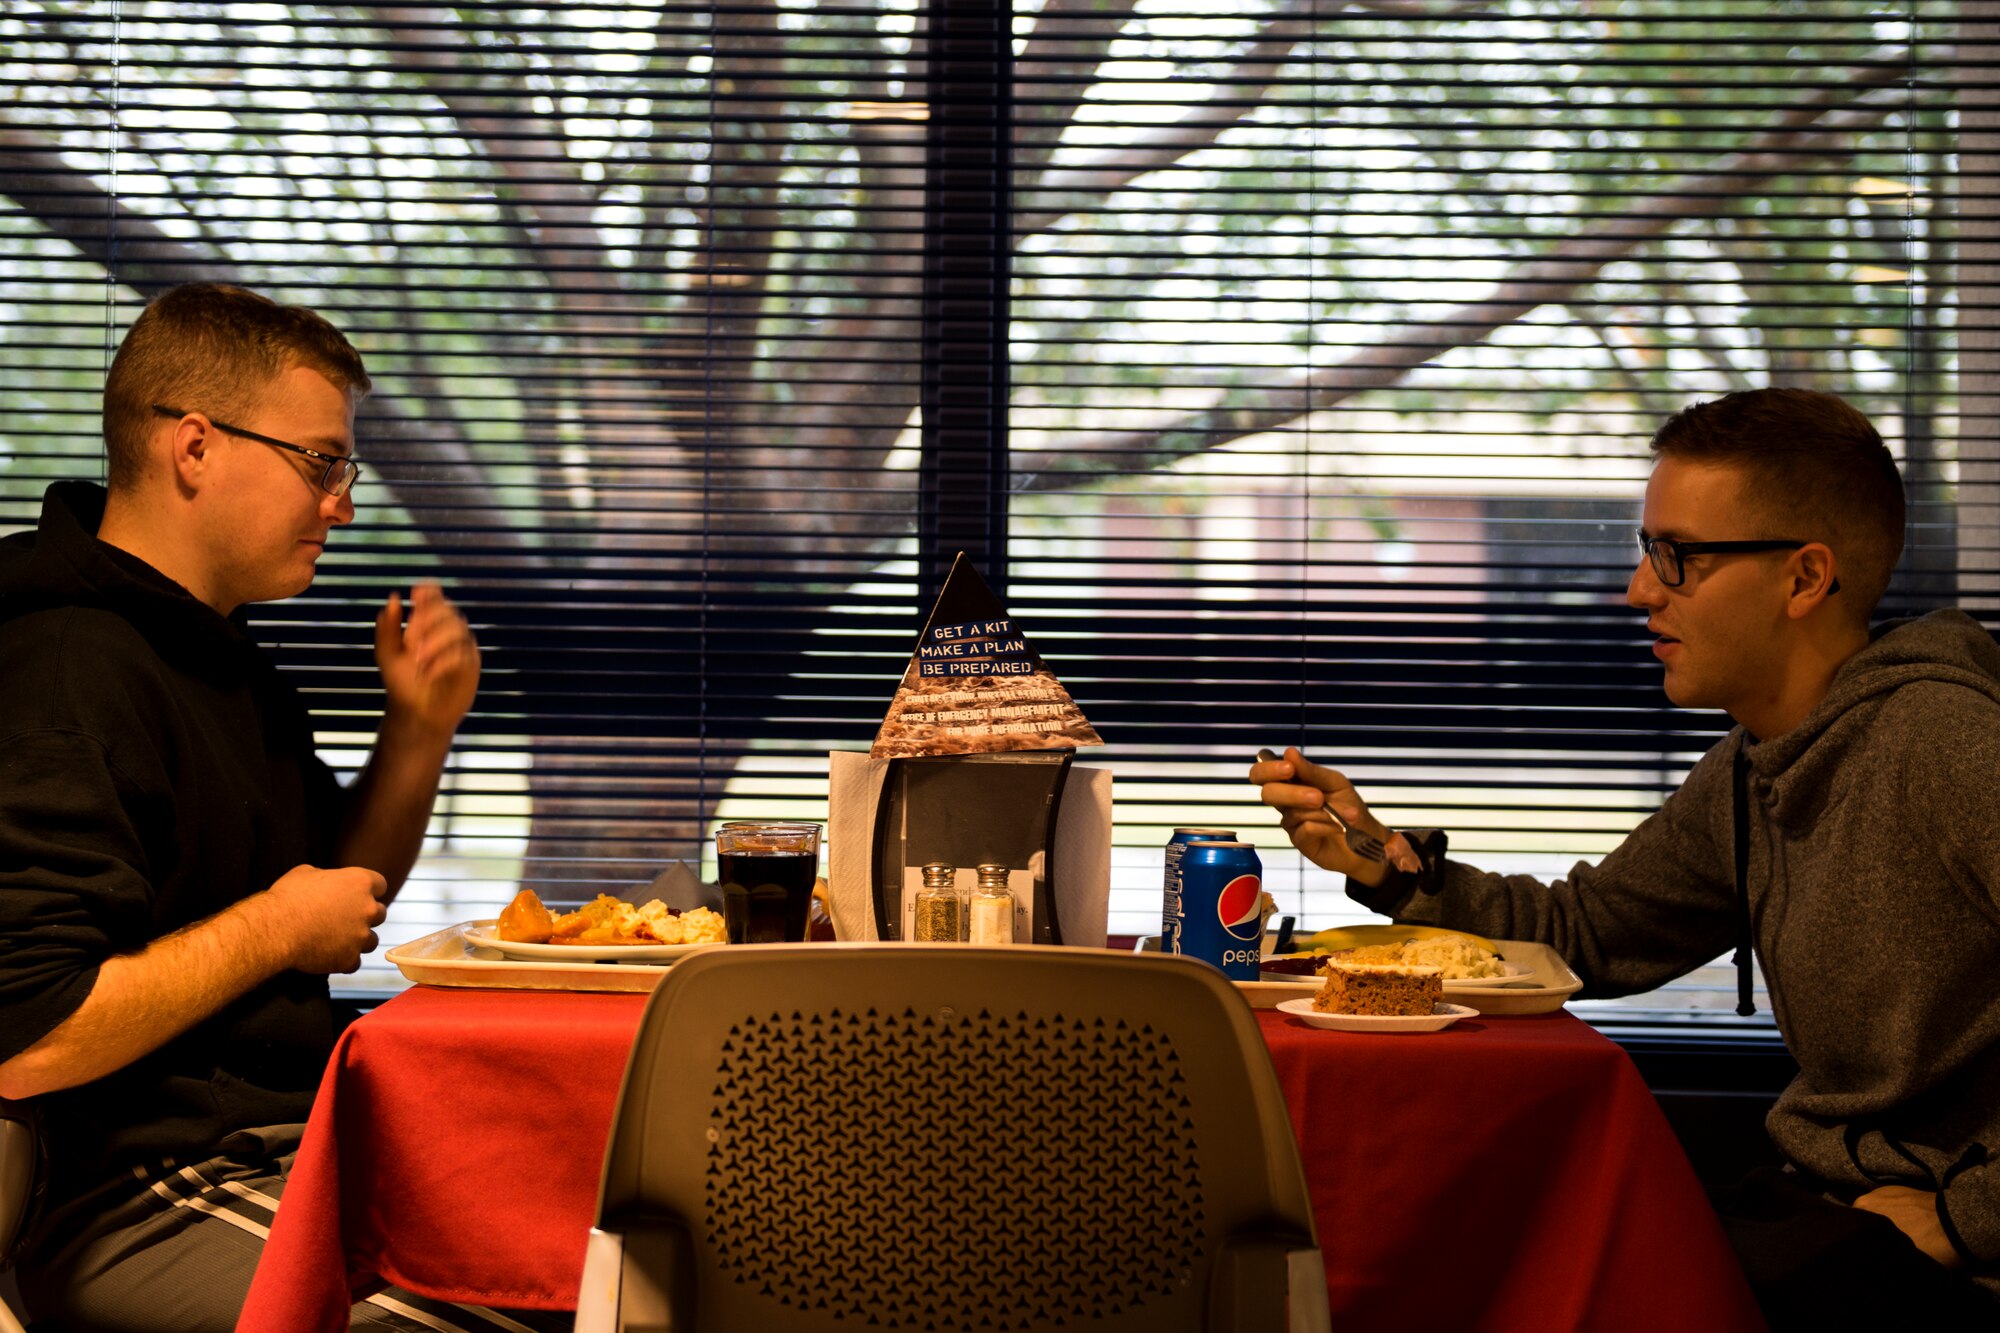 Airman Brayden Olson, left, and Airman 1st Class Dalton Murphy, both 723d Aircraft Maintenance Squadron crew chiefs, eat together on Thanksgiving Day in the Georgia Pines Dining Facility, Nov. 23, 2017, at Moody Air Force Base, Ga. The Thanksgiving Day meal was an opportunity for Airmen, retirees, dependents and leadership to enjoy a traditional Thanksgiving meal. (U.S. Air Force photo by Airman 1st Class Erick Requadt)